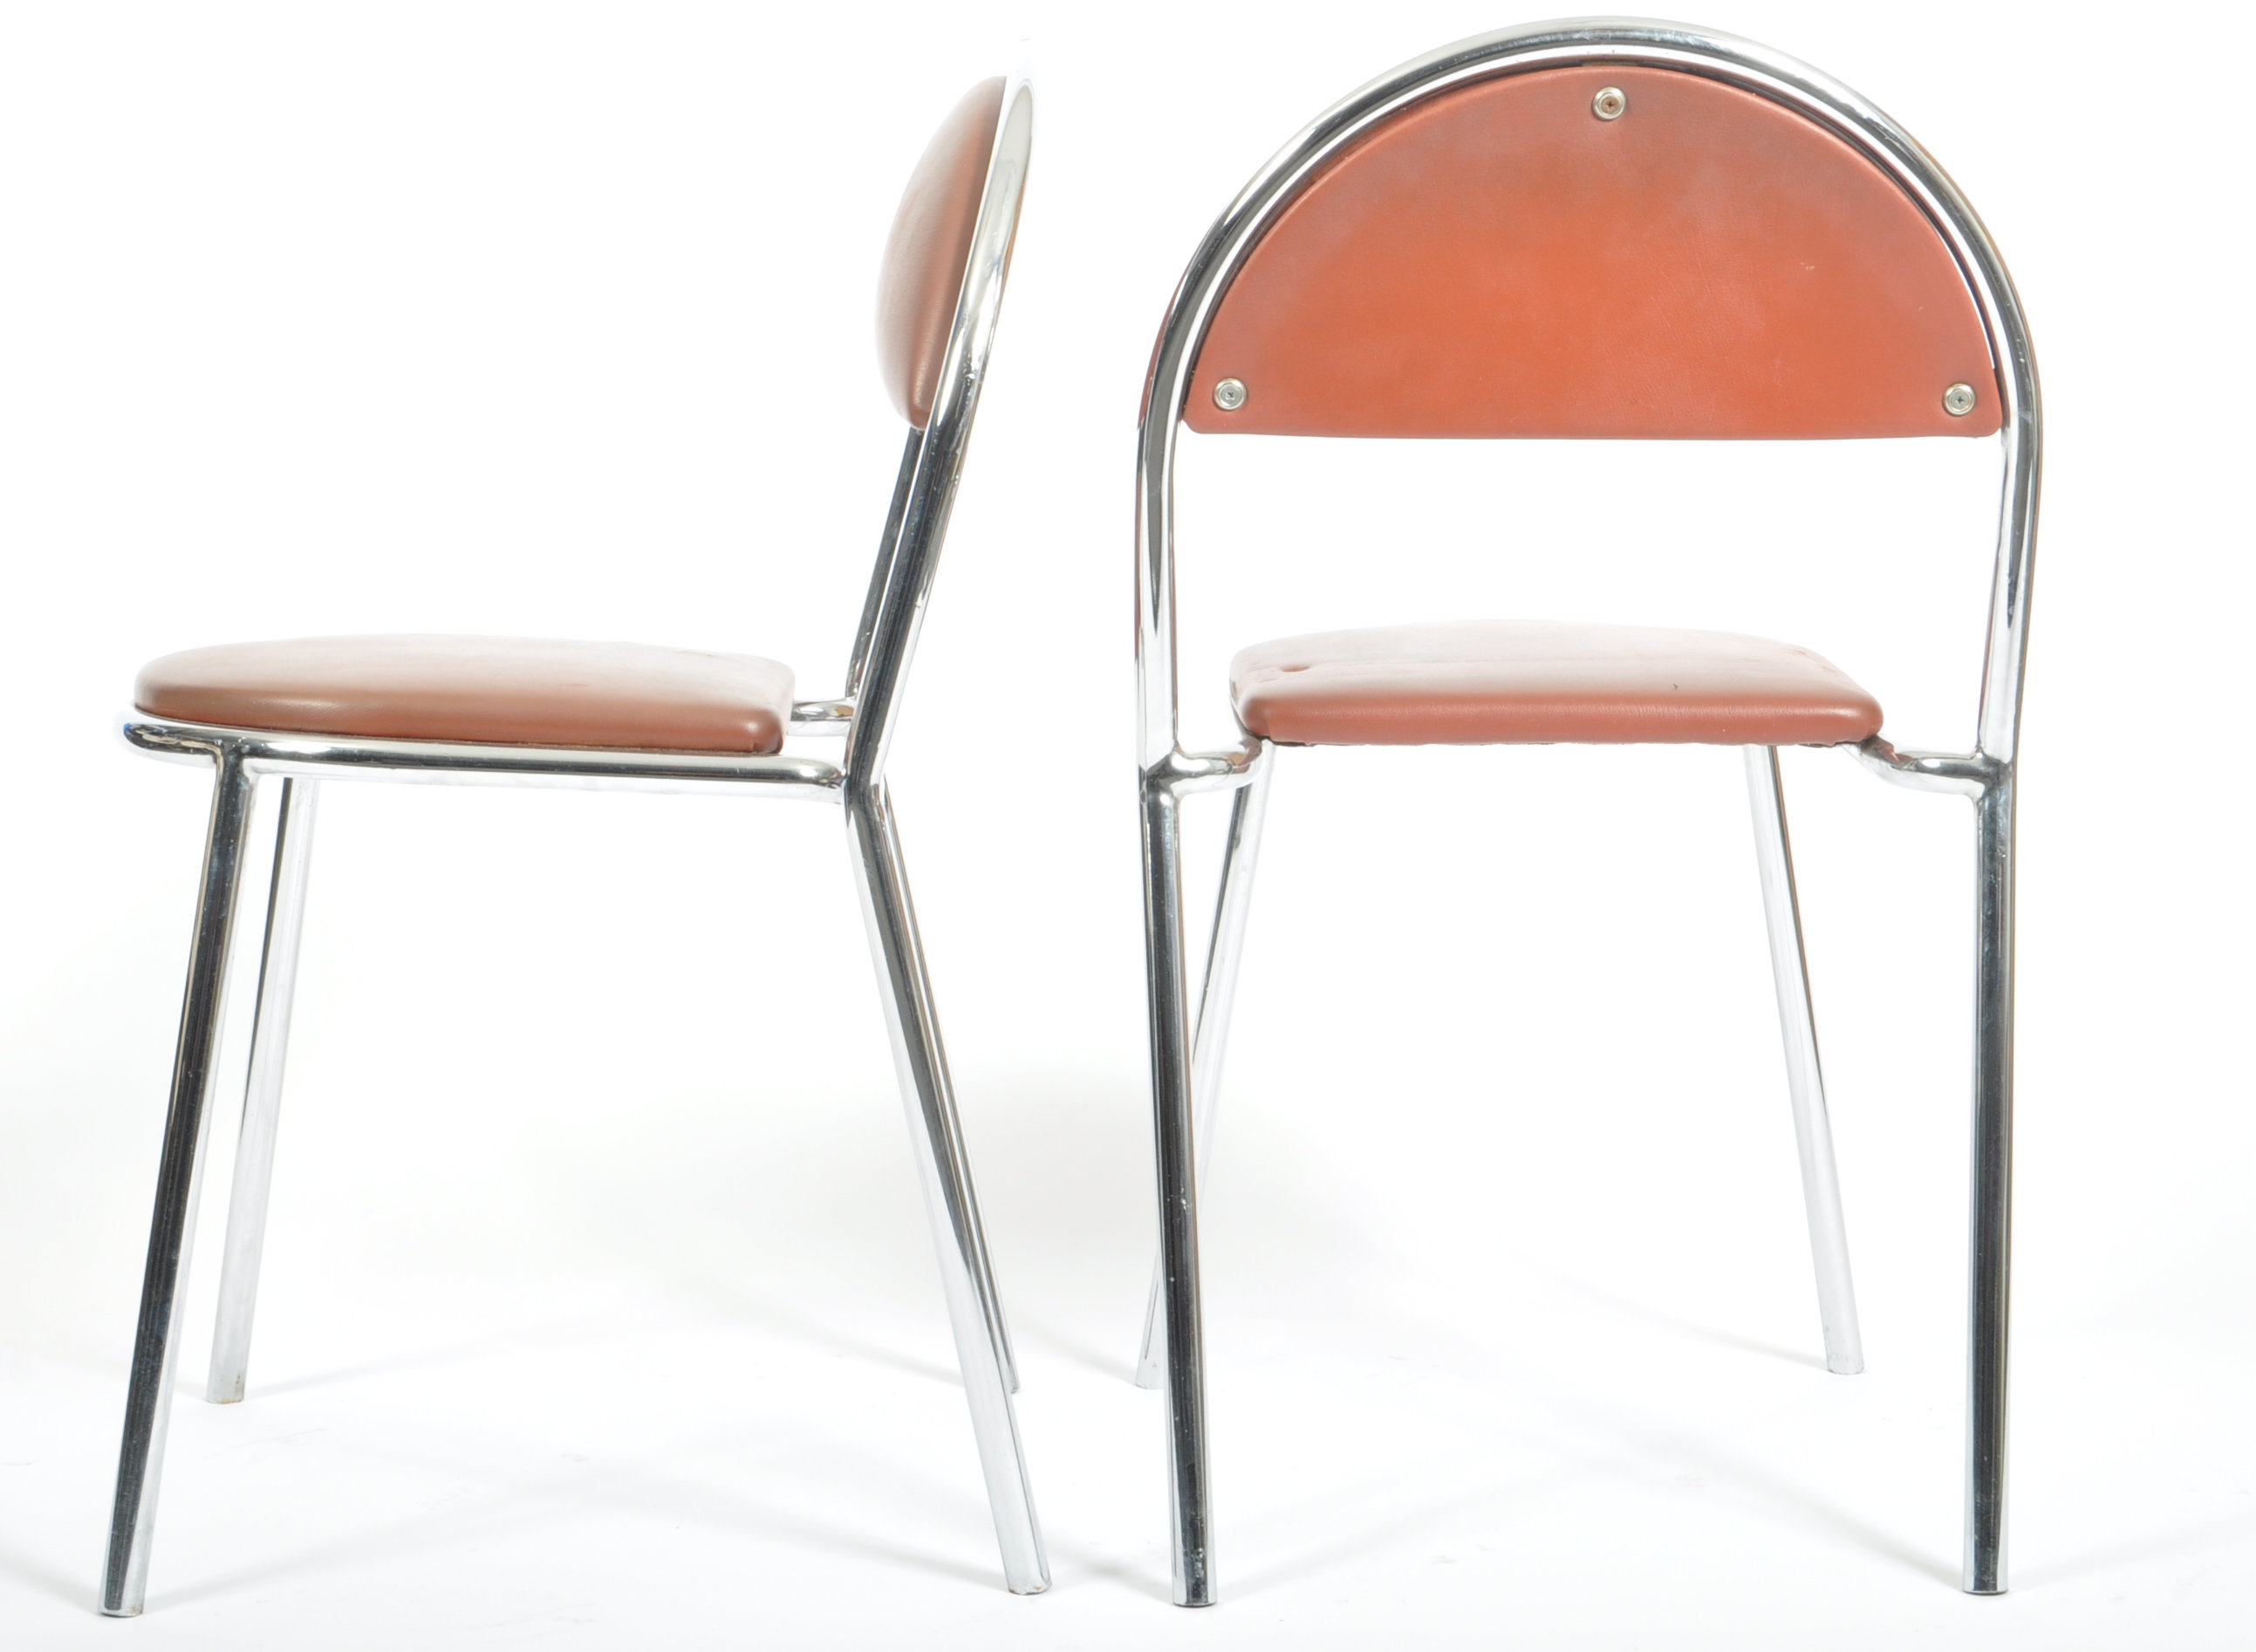 ZOEFTIG - MATCHING PAIR OF VINTAGE CHROME AIRPORT CHAIRS - Image 3 of 4